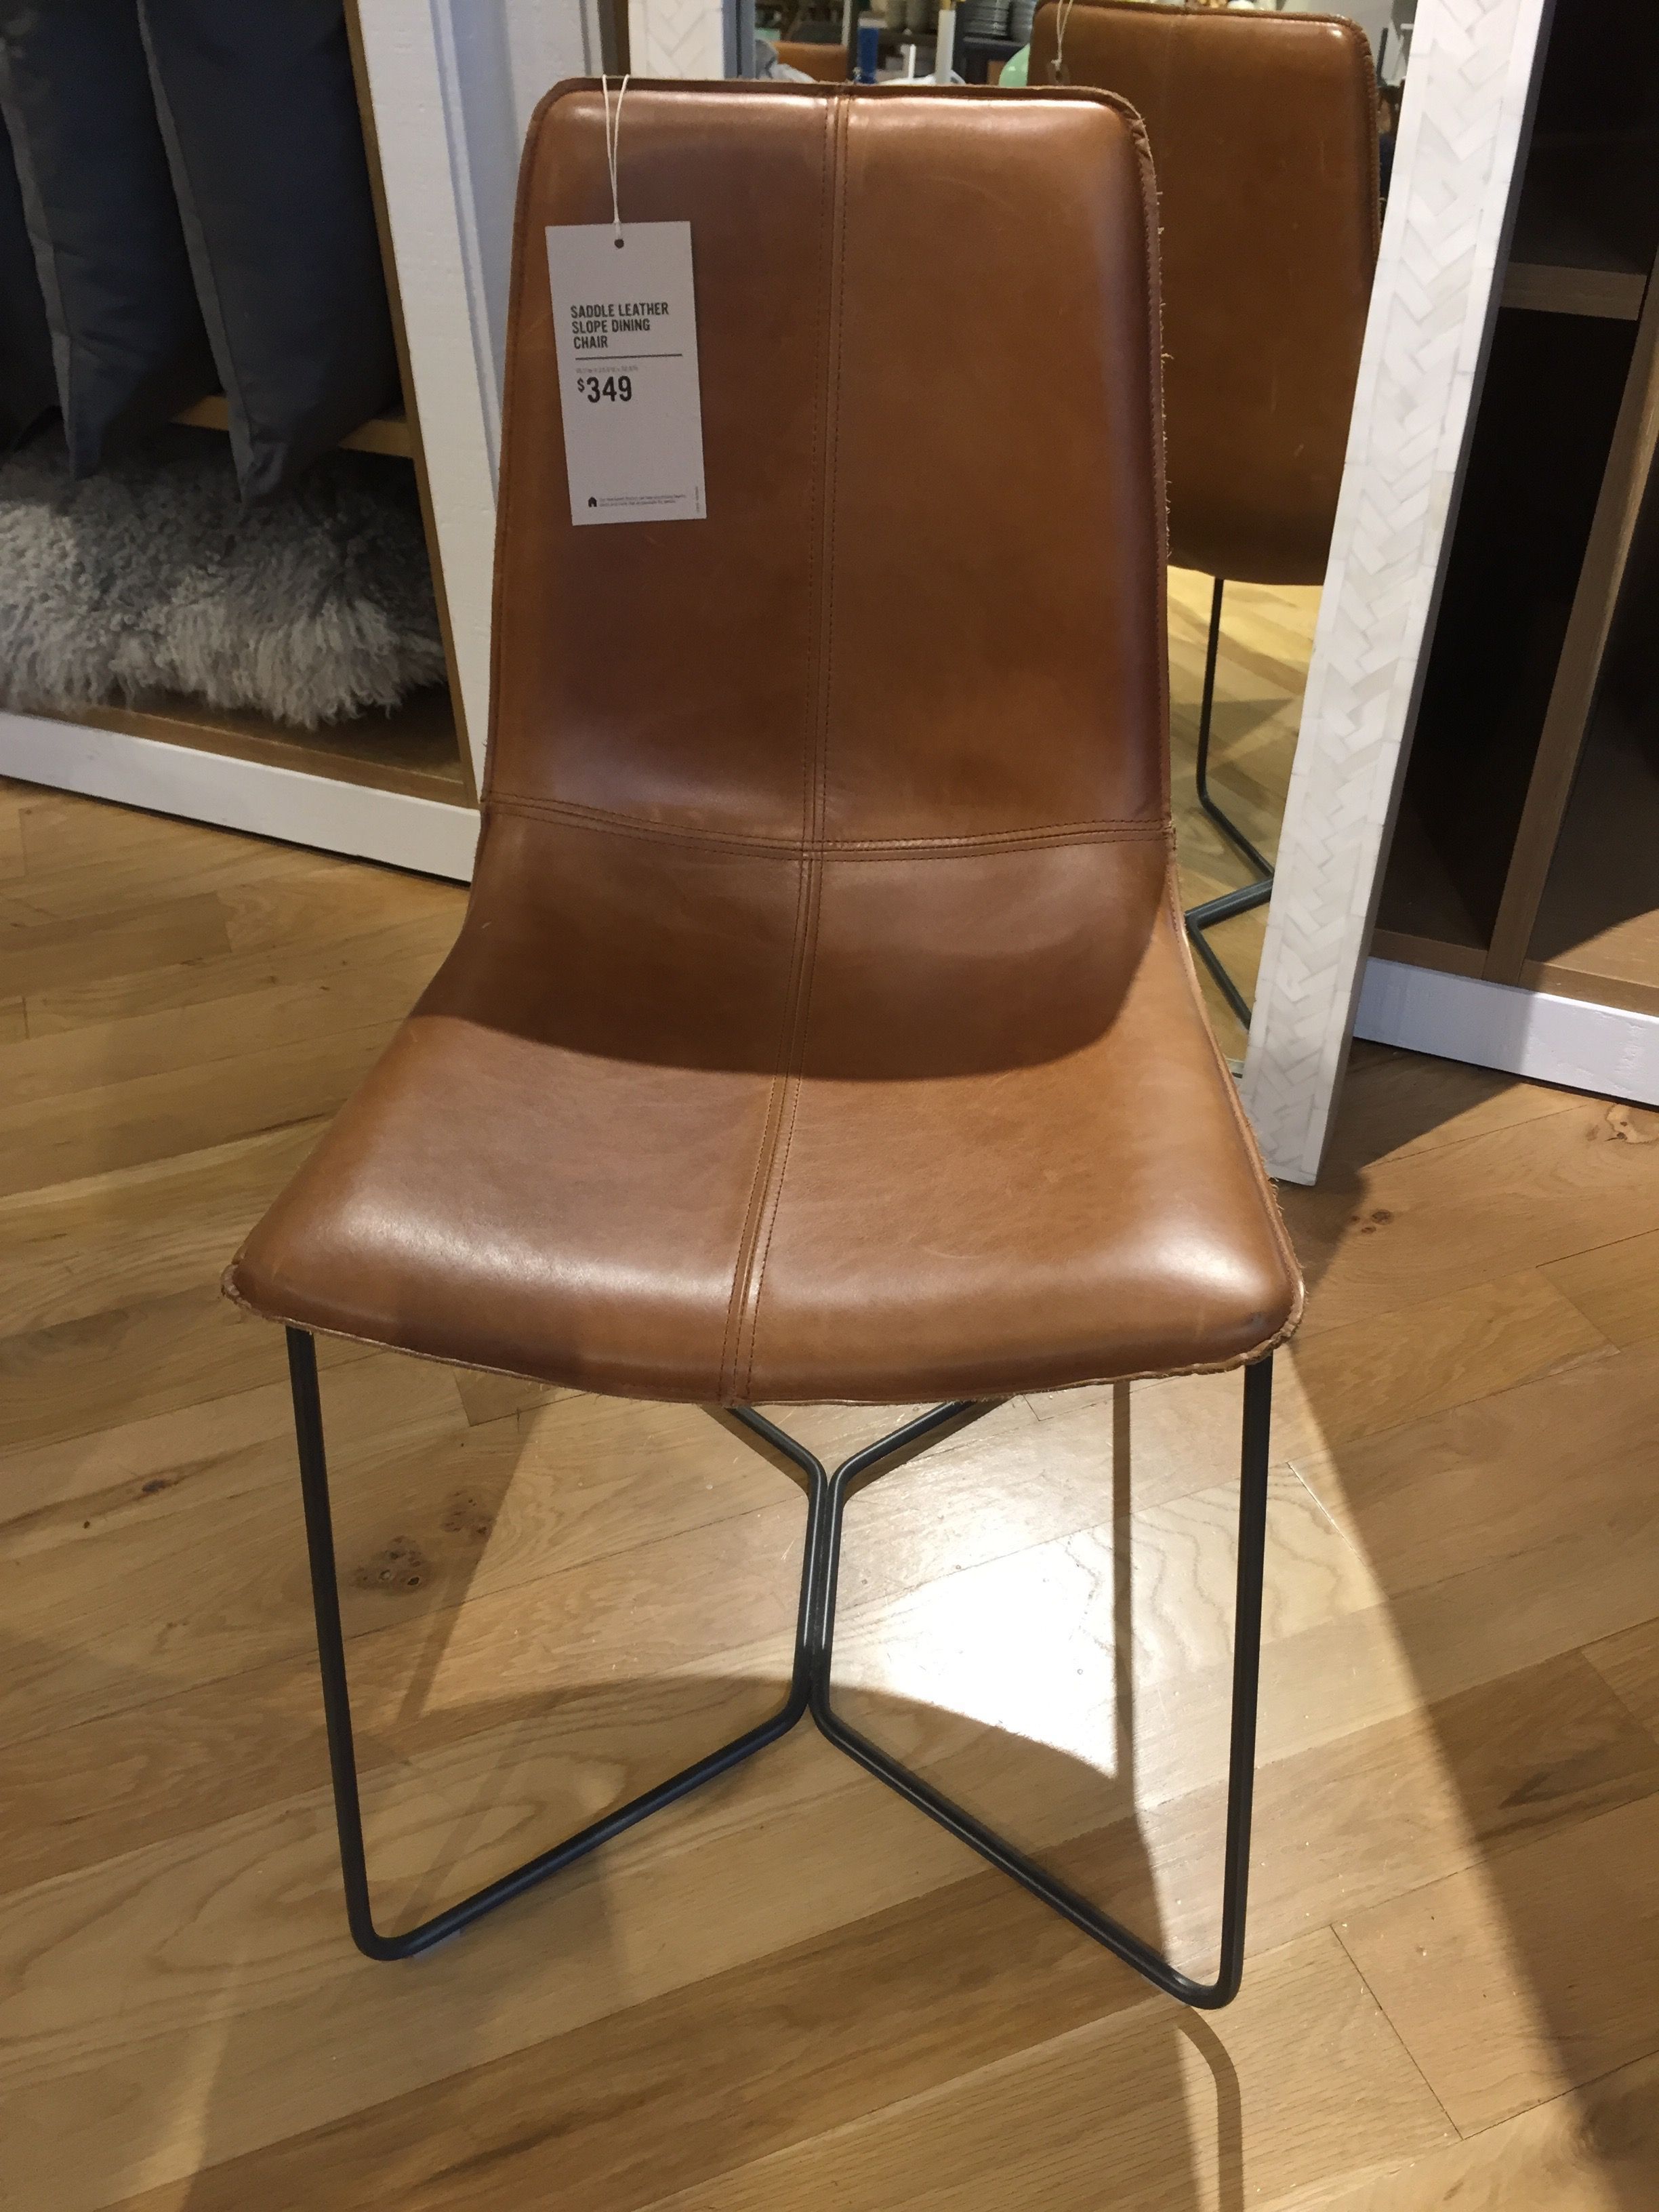 Saddle Leather Slope Dining Chair – West Elm | Furnishings | Chair Inside Elm Sofa Chairs (View 9 of 25)